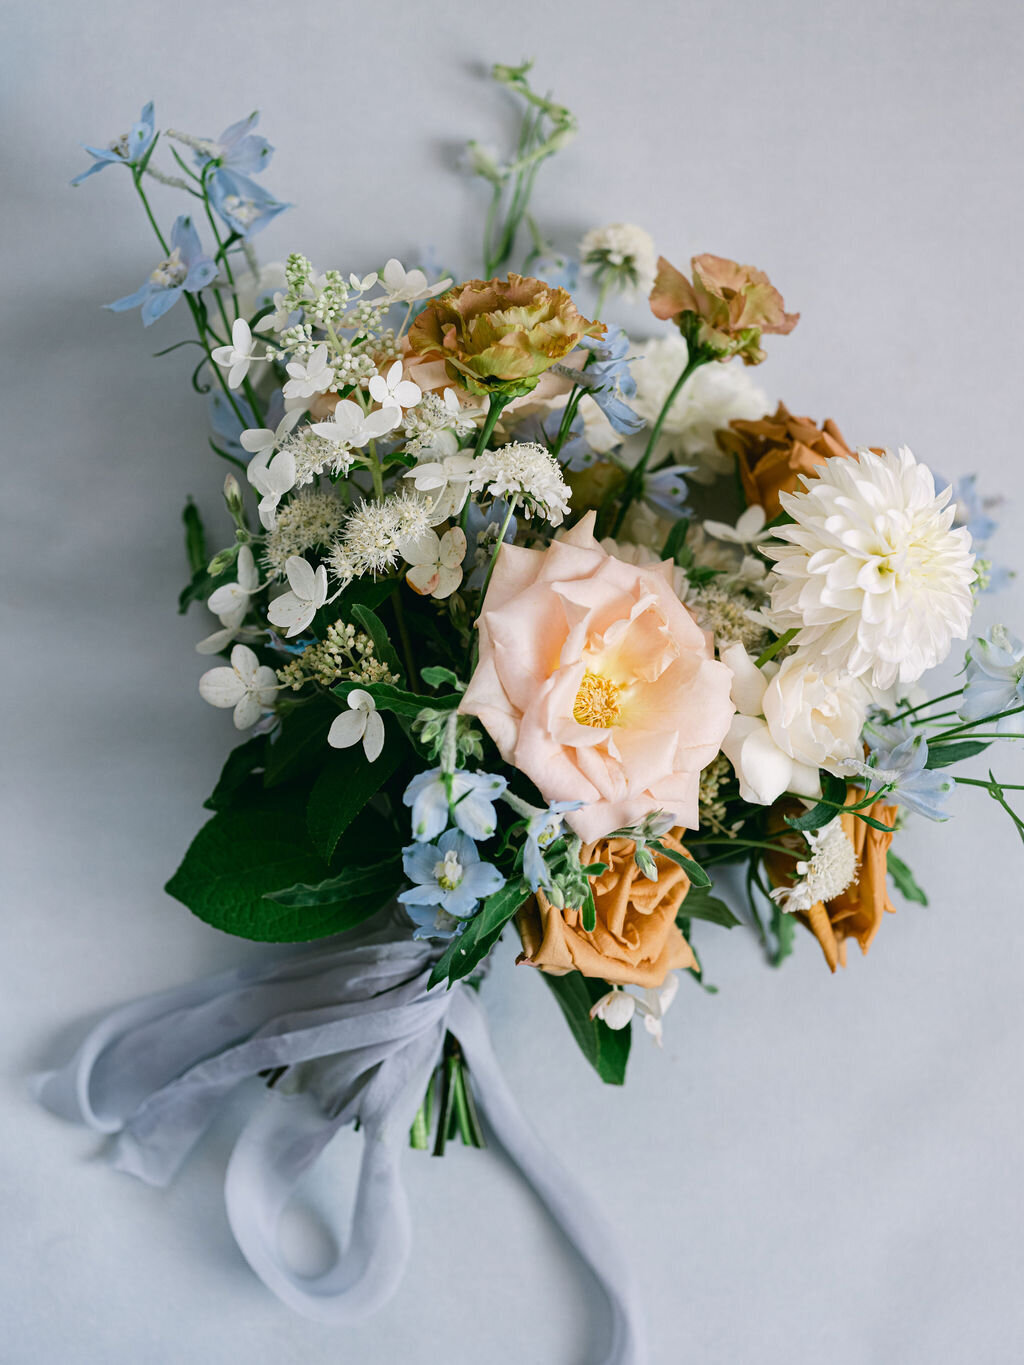 Bridal Bouquet with peach garden rose, white dahlia, toffee roses, white hydrangea, light blue delphinium and brown lisianthus and blue silk ribbon.